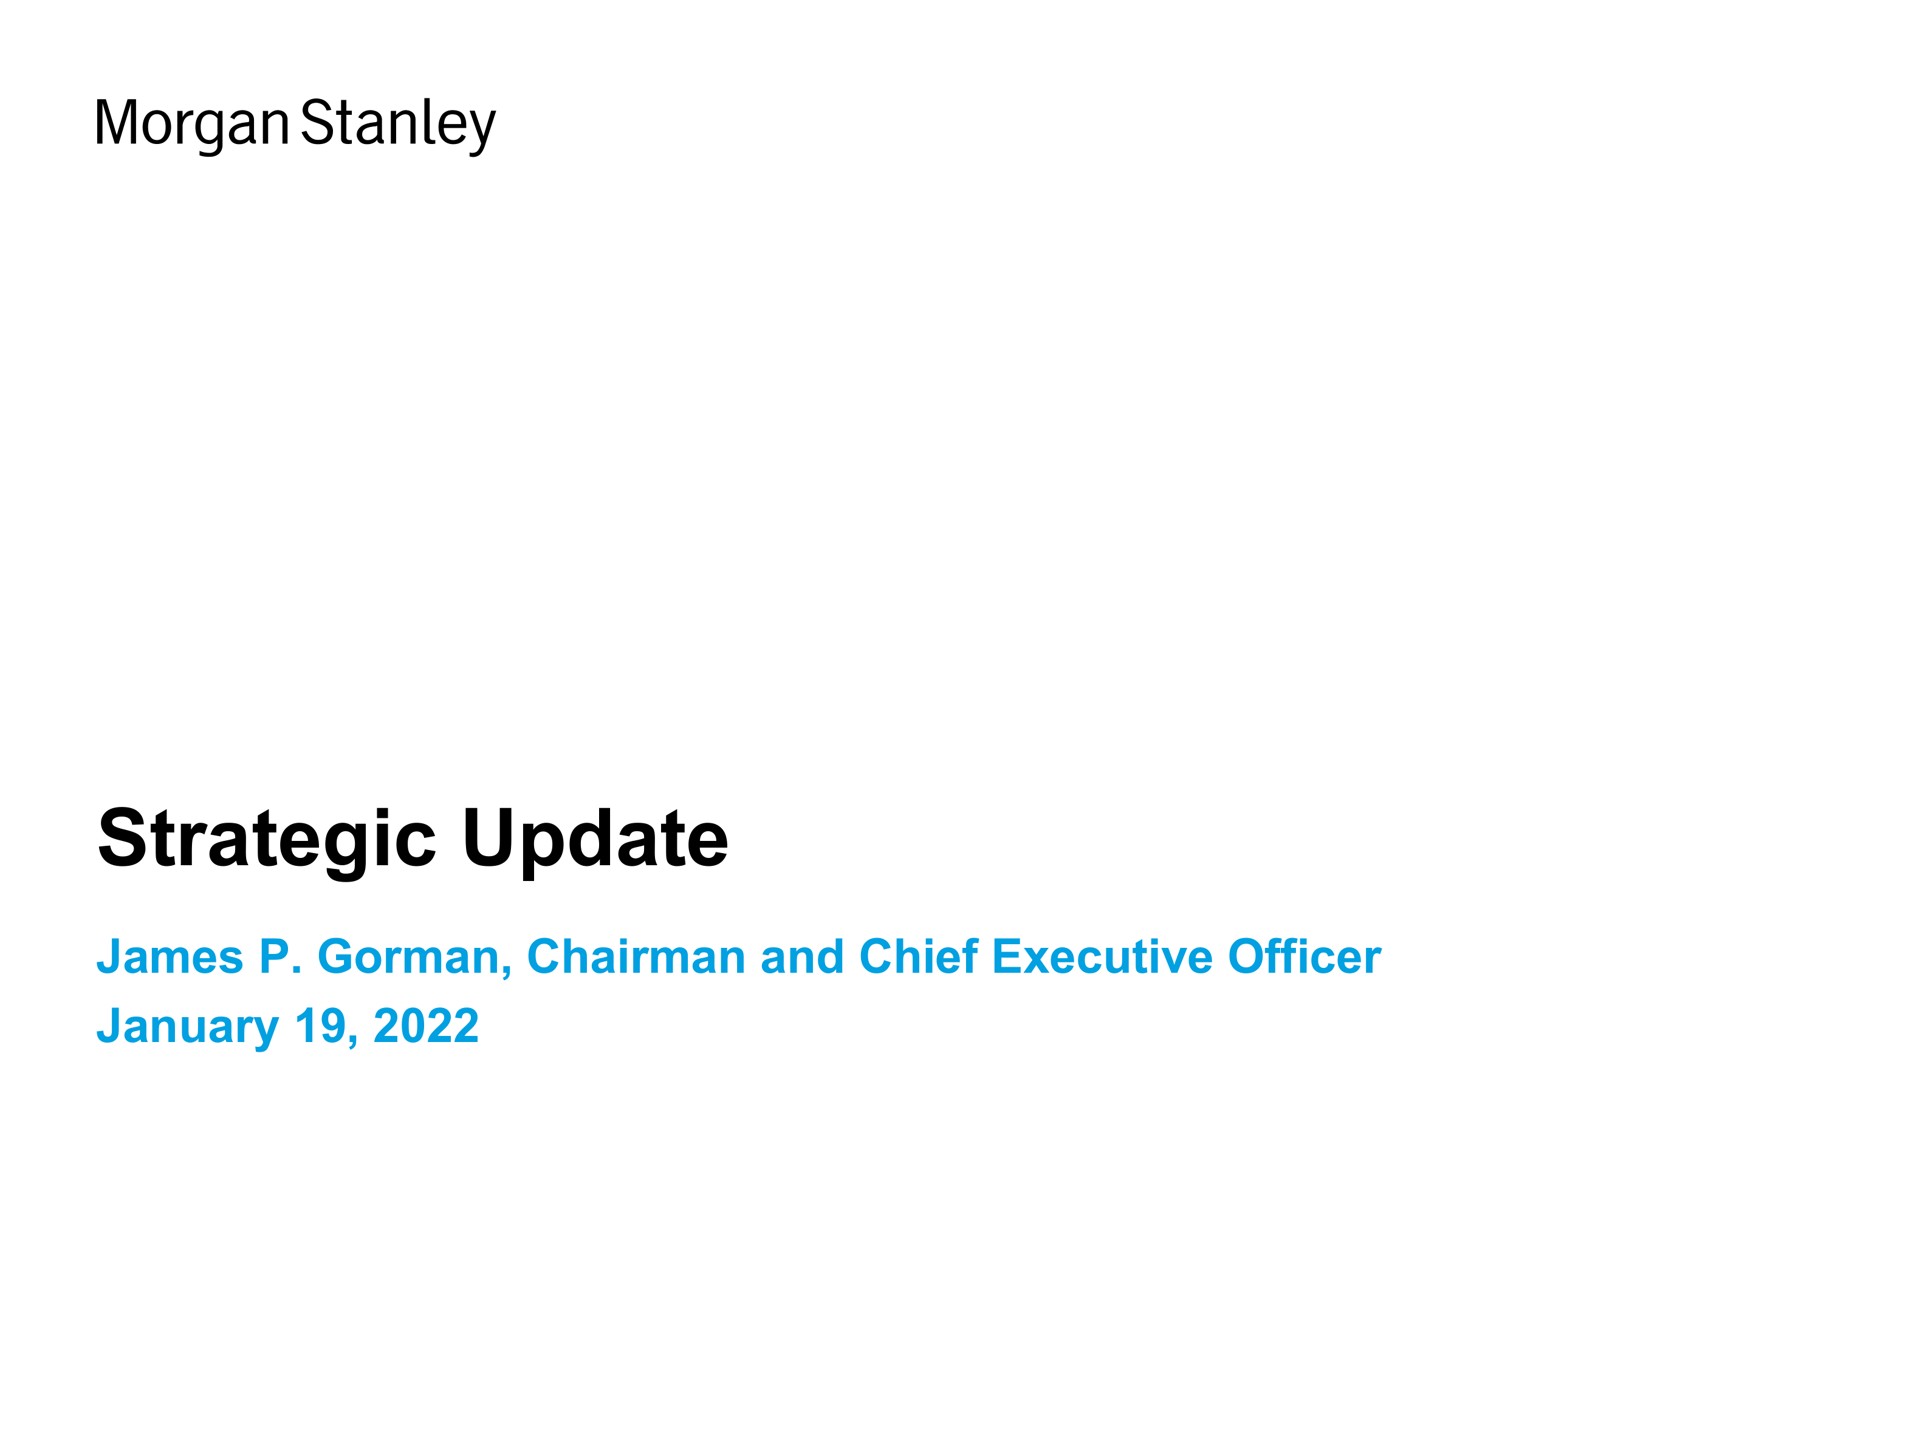 strategic update james chairman and chief executive officer morgan | Morgan Stanley